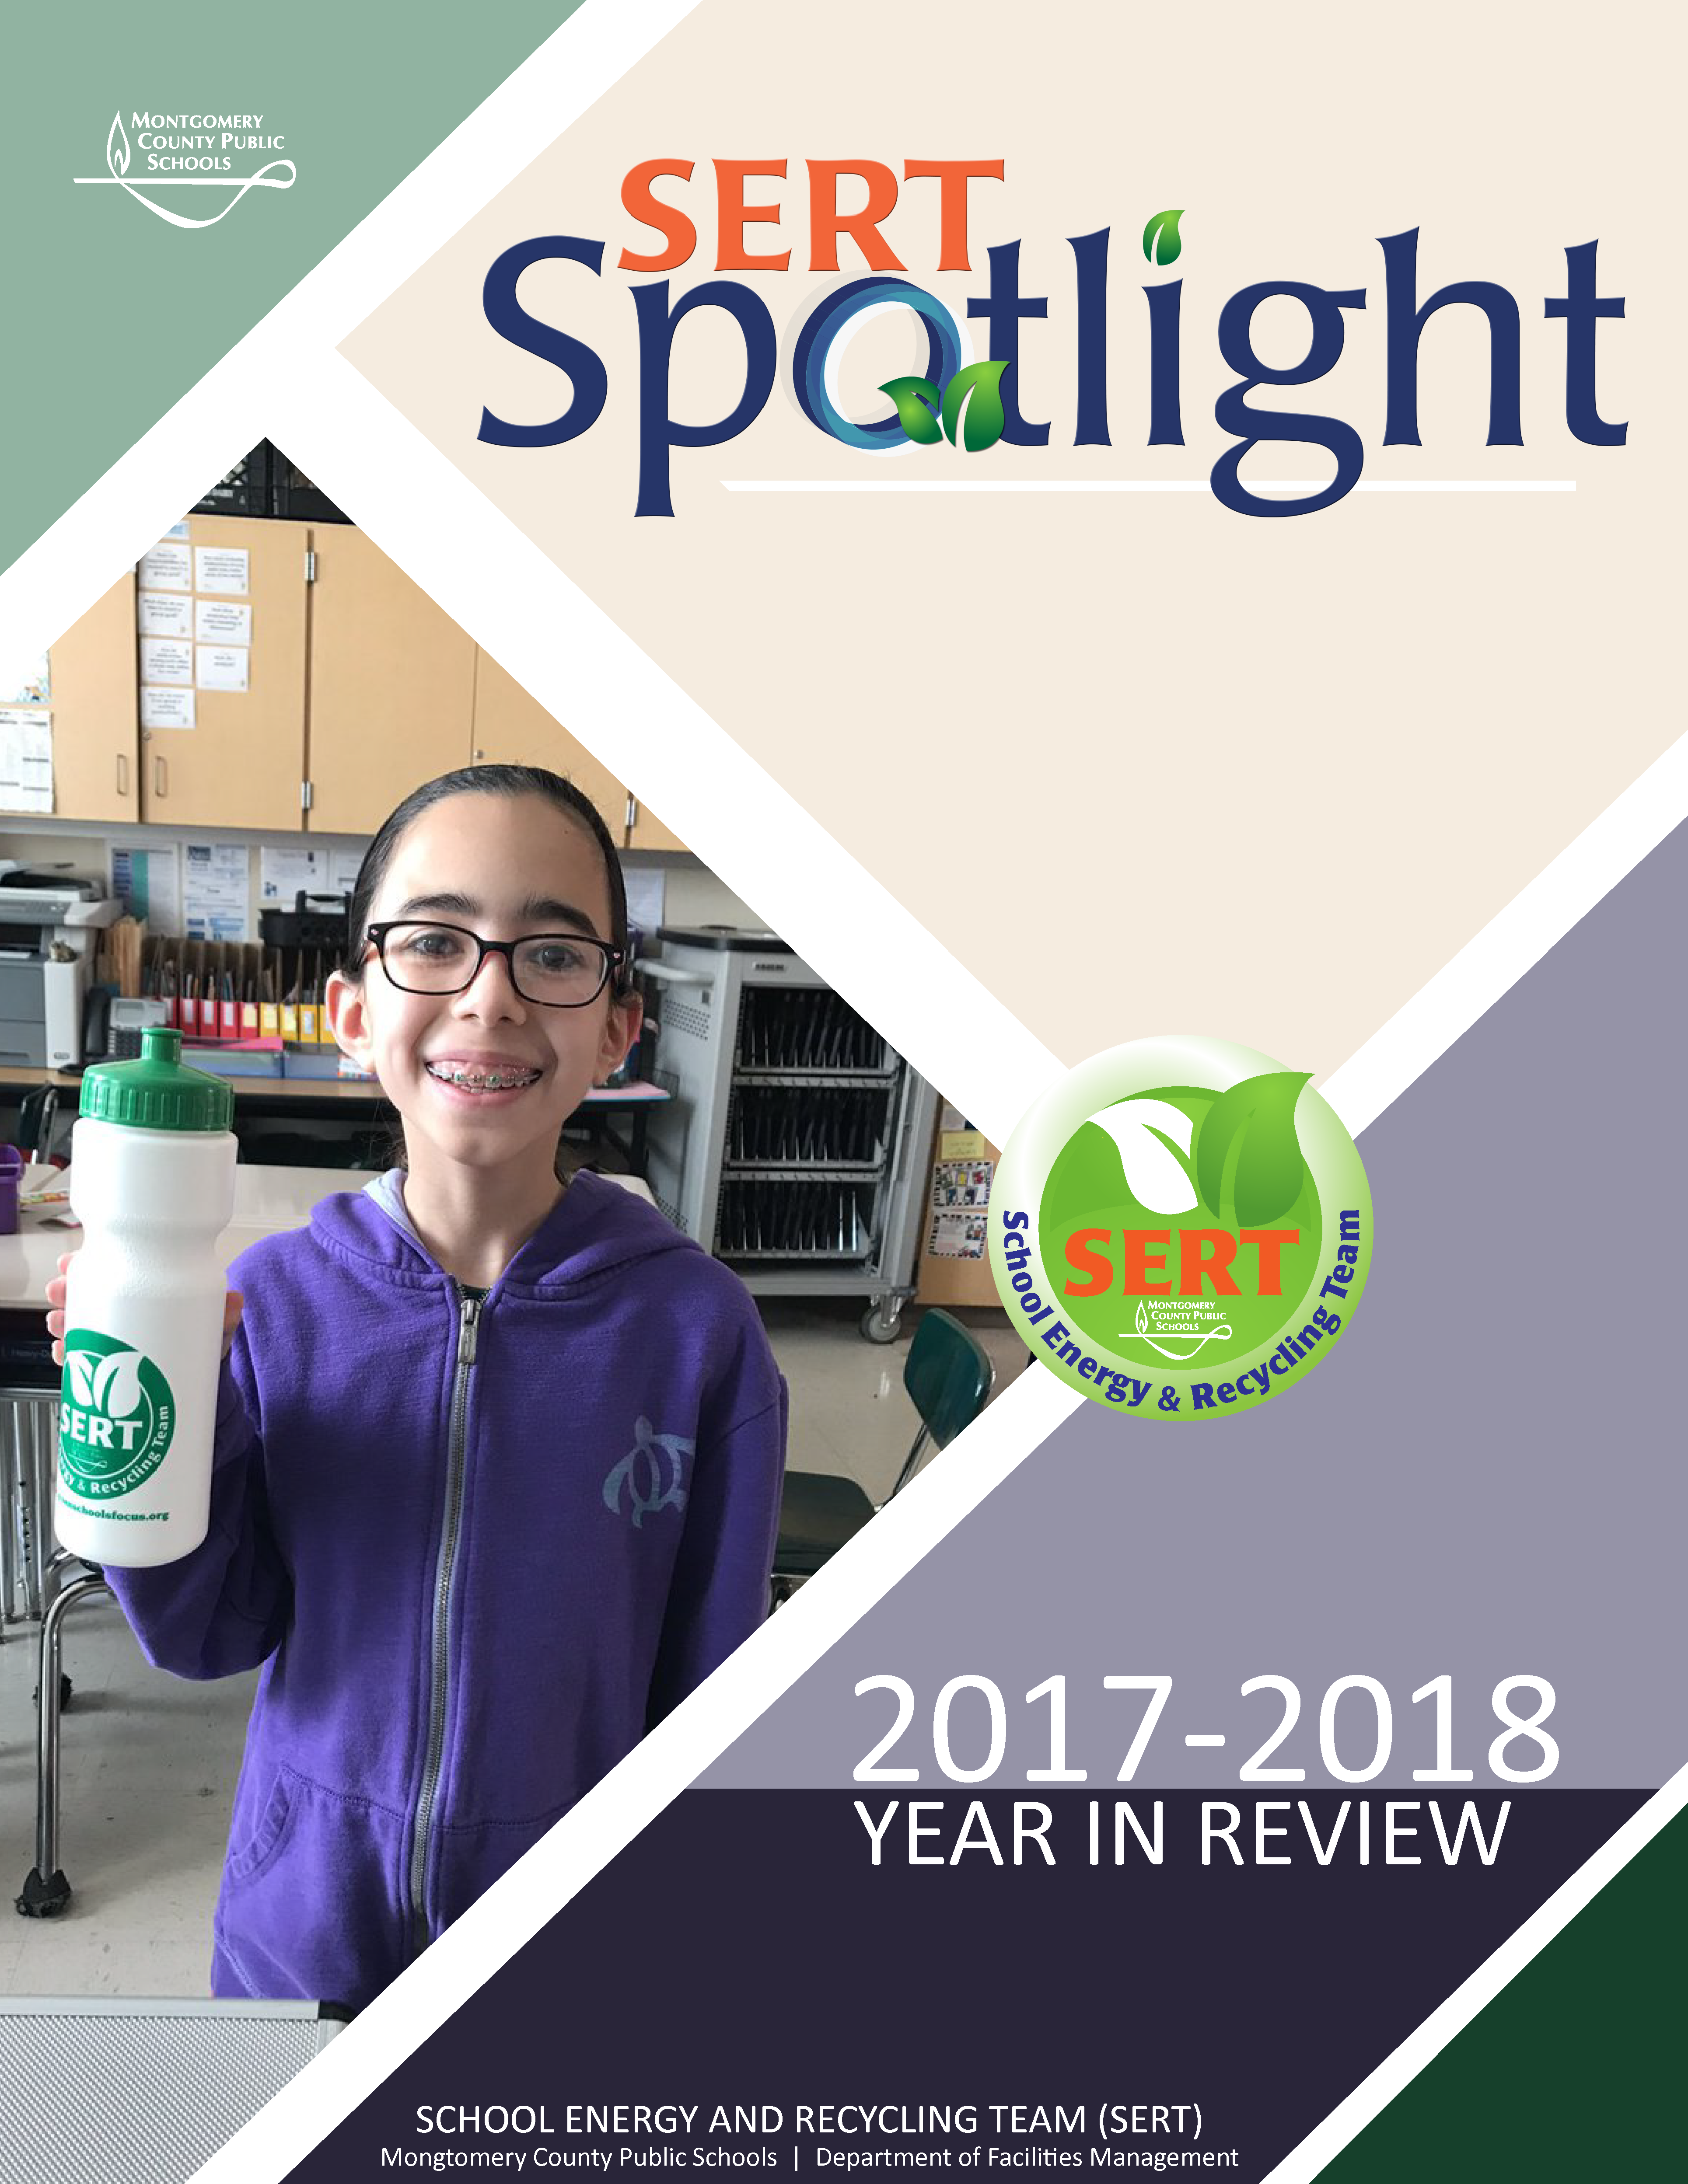 Click here to view all 10 issues of SERT Spotlight for the 2017-2018 school year.